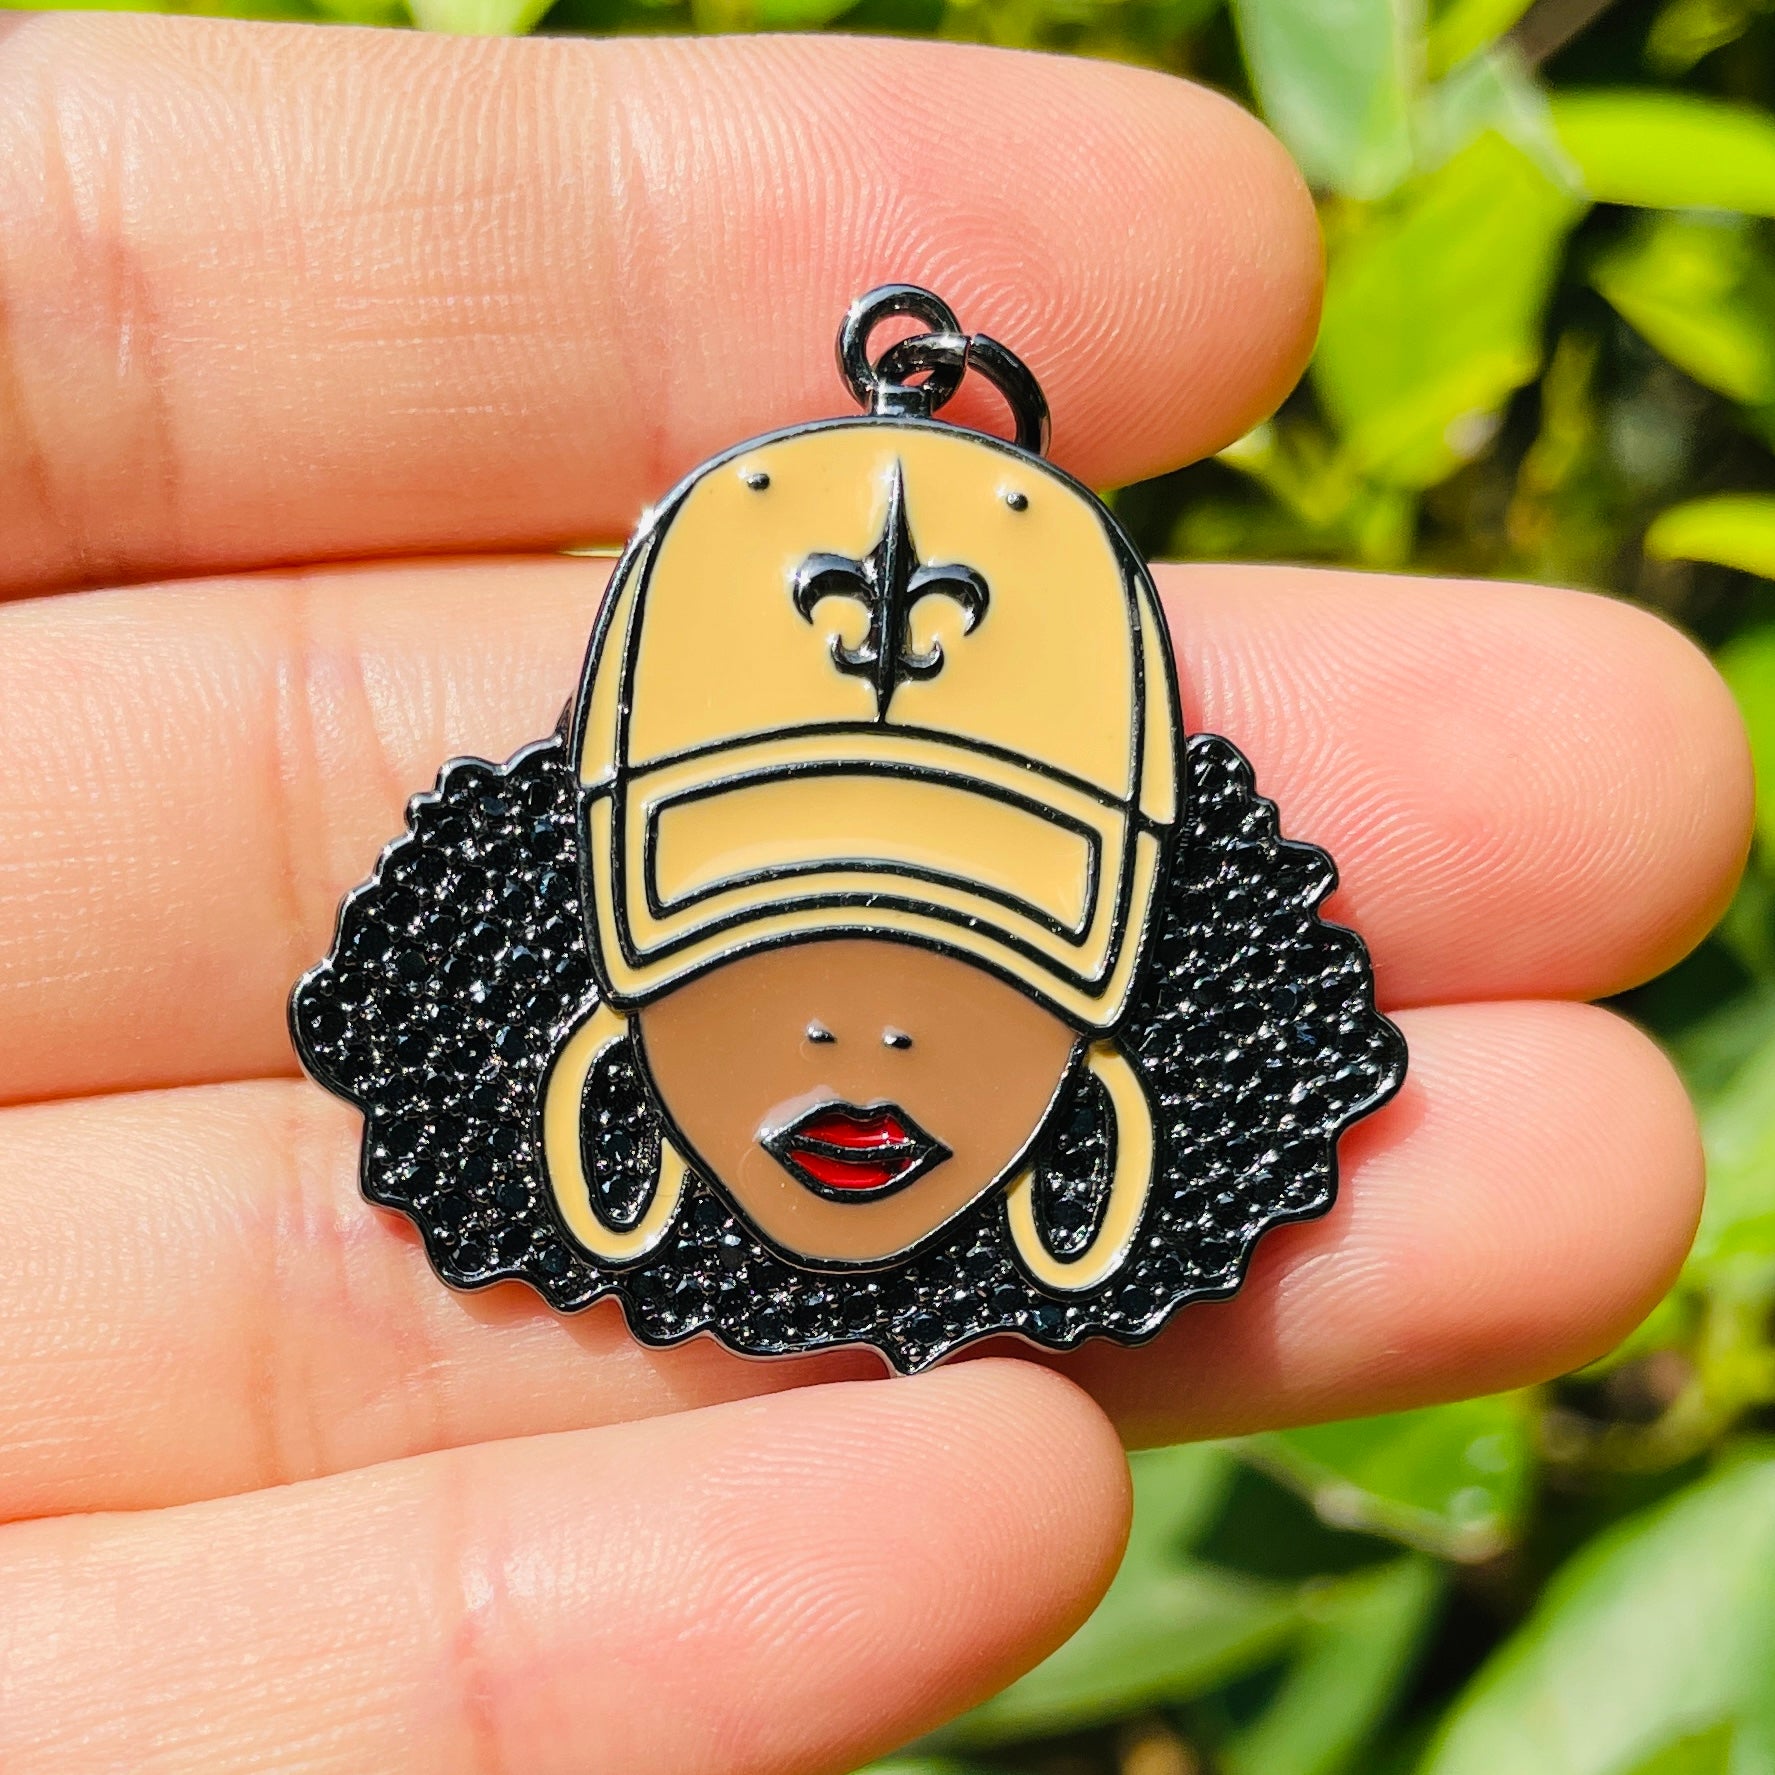 10pcs/lot 34*33mm CZ Paved Afro Black Who Dat Girl Saints Charms Black on Black CZ Paved Charms Afro Girl/Queen Charms American Football Sports Louisiana Inspired New Charms Arrivals Charms Beads Beyond